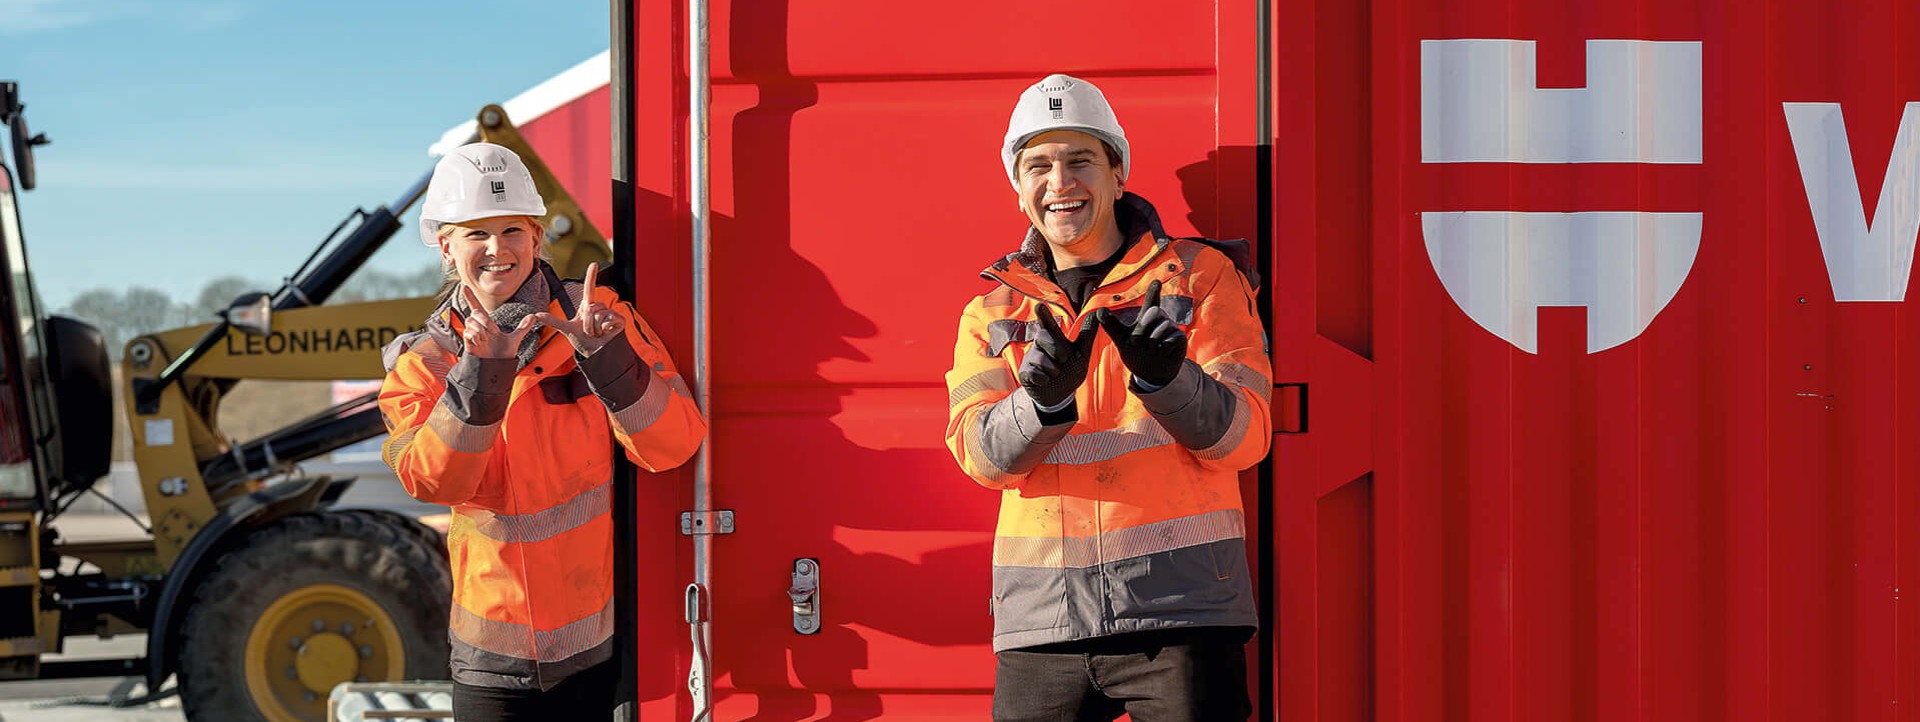 Tina Waschke and Carsten Gruchmann - Site managers at the construction firm Leonhard Weiss who are in charge of the new Würth transshipment depot